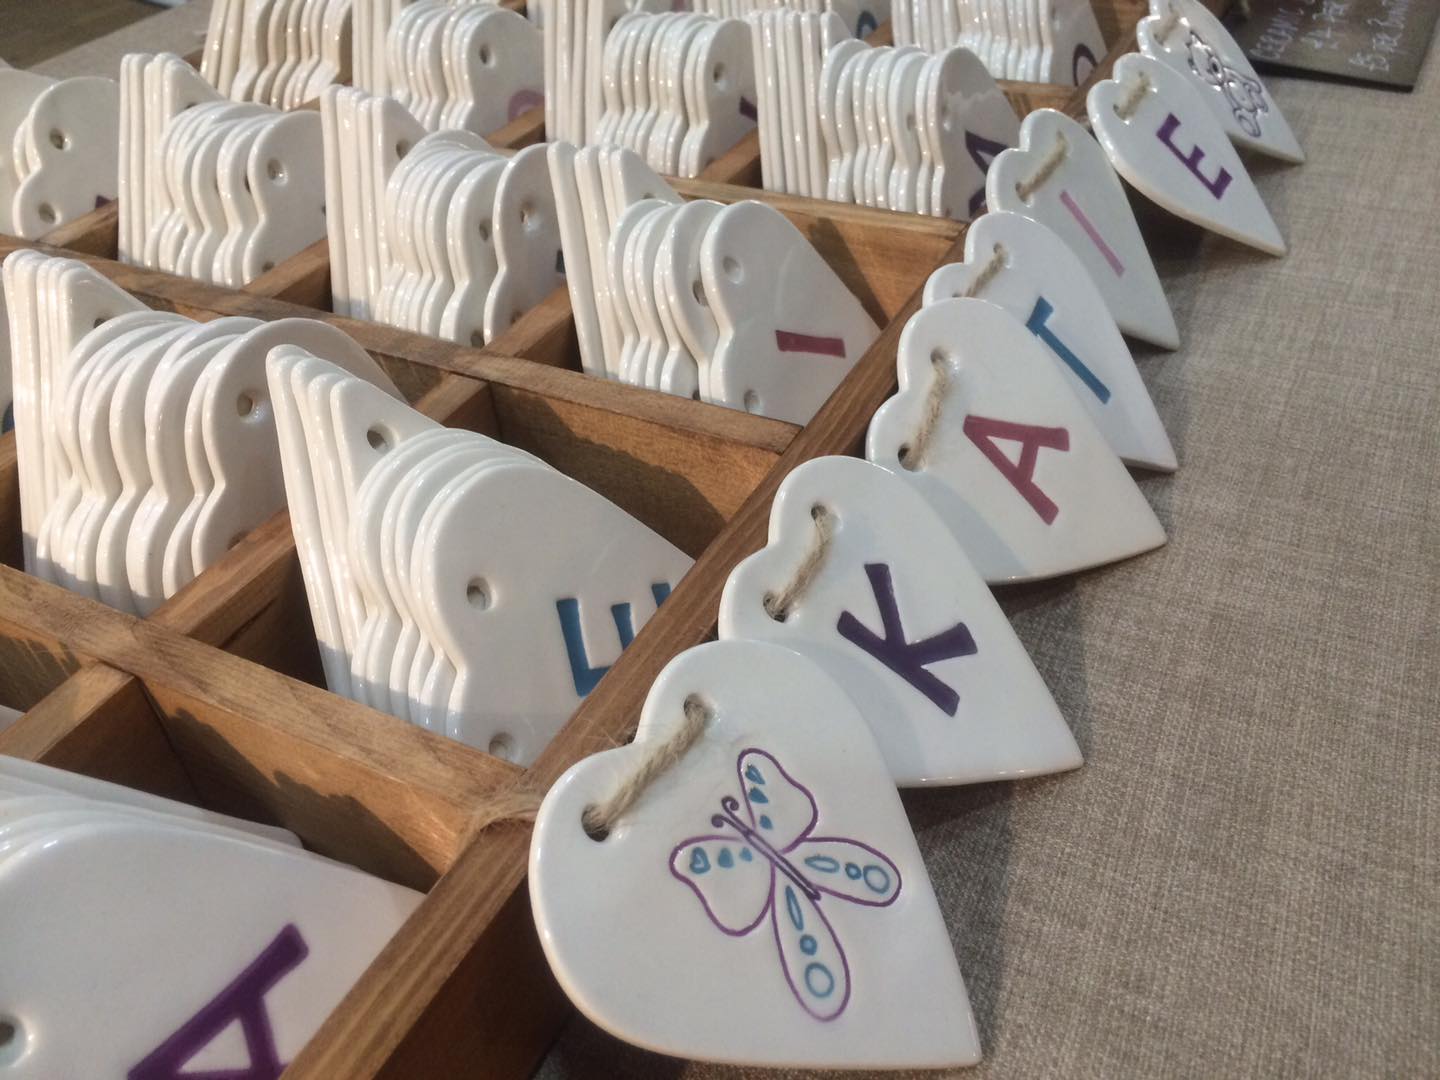 Ceramic Letter Bunting Available in Store!